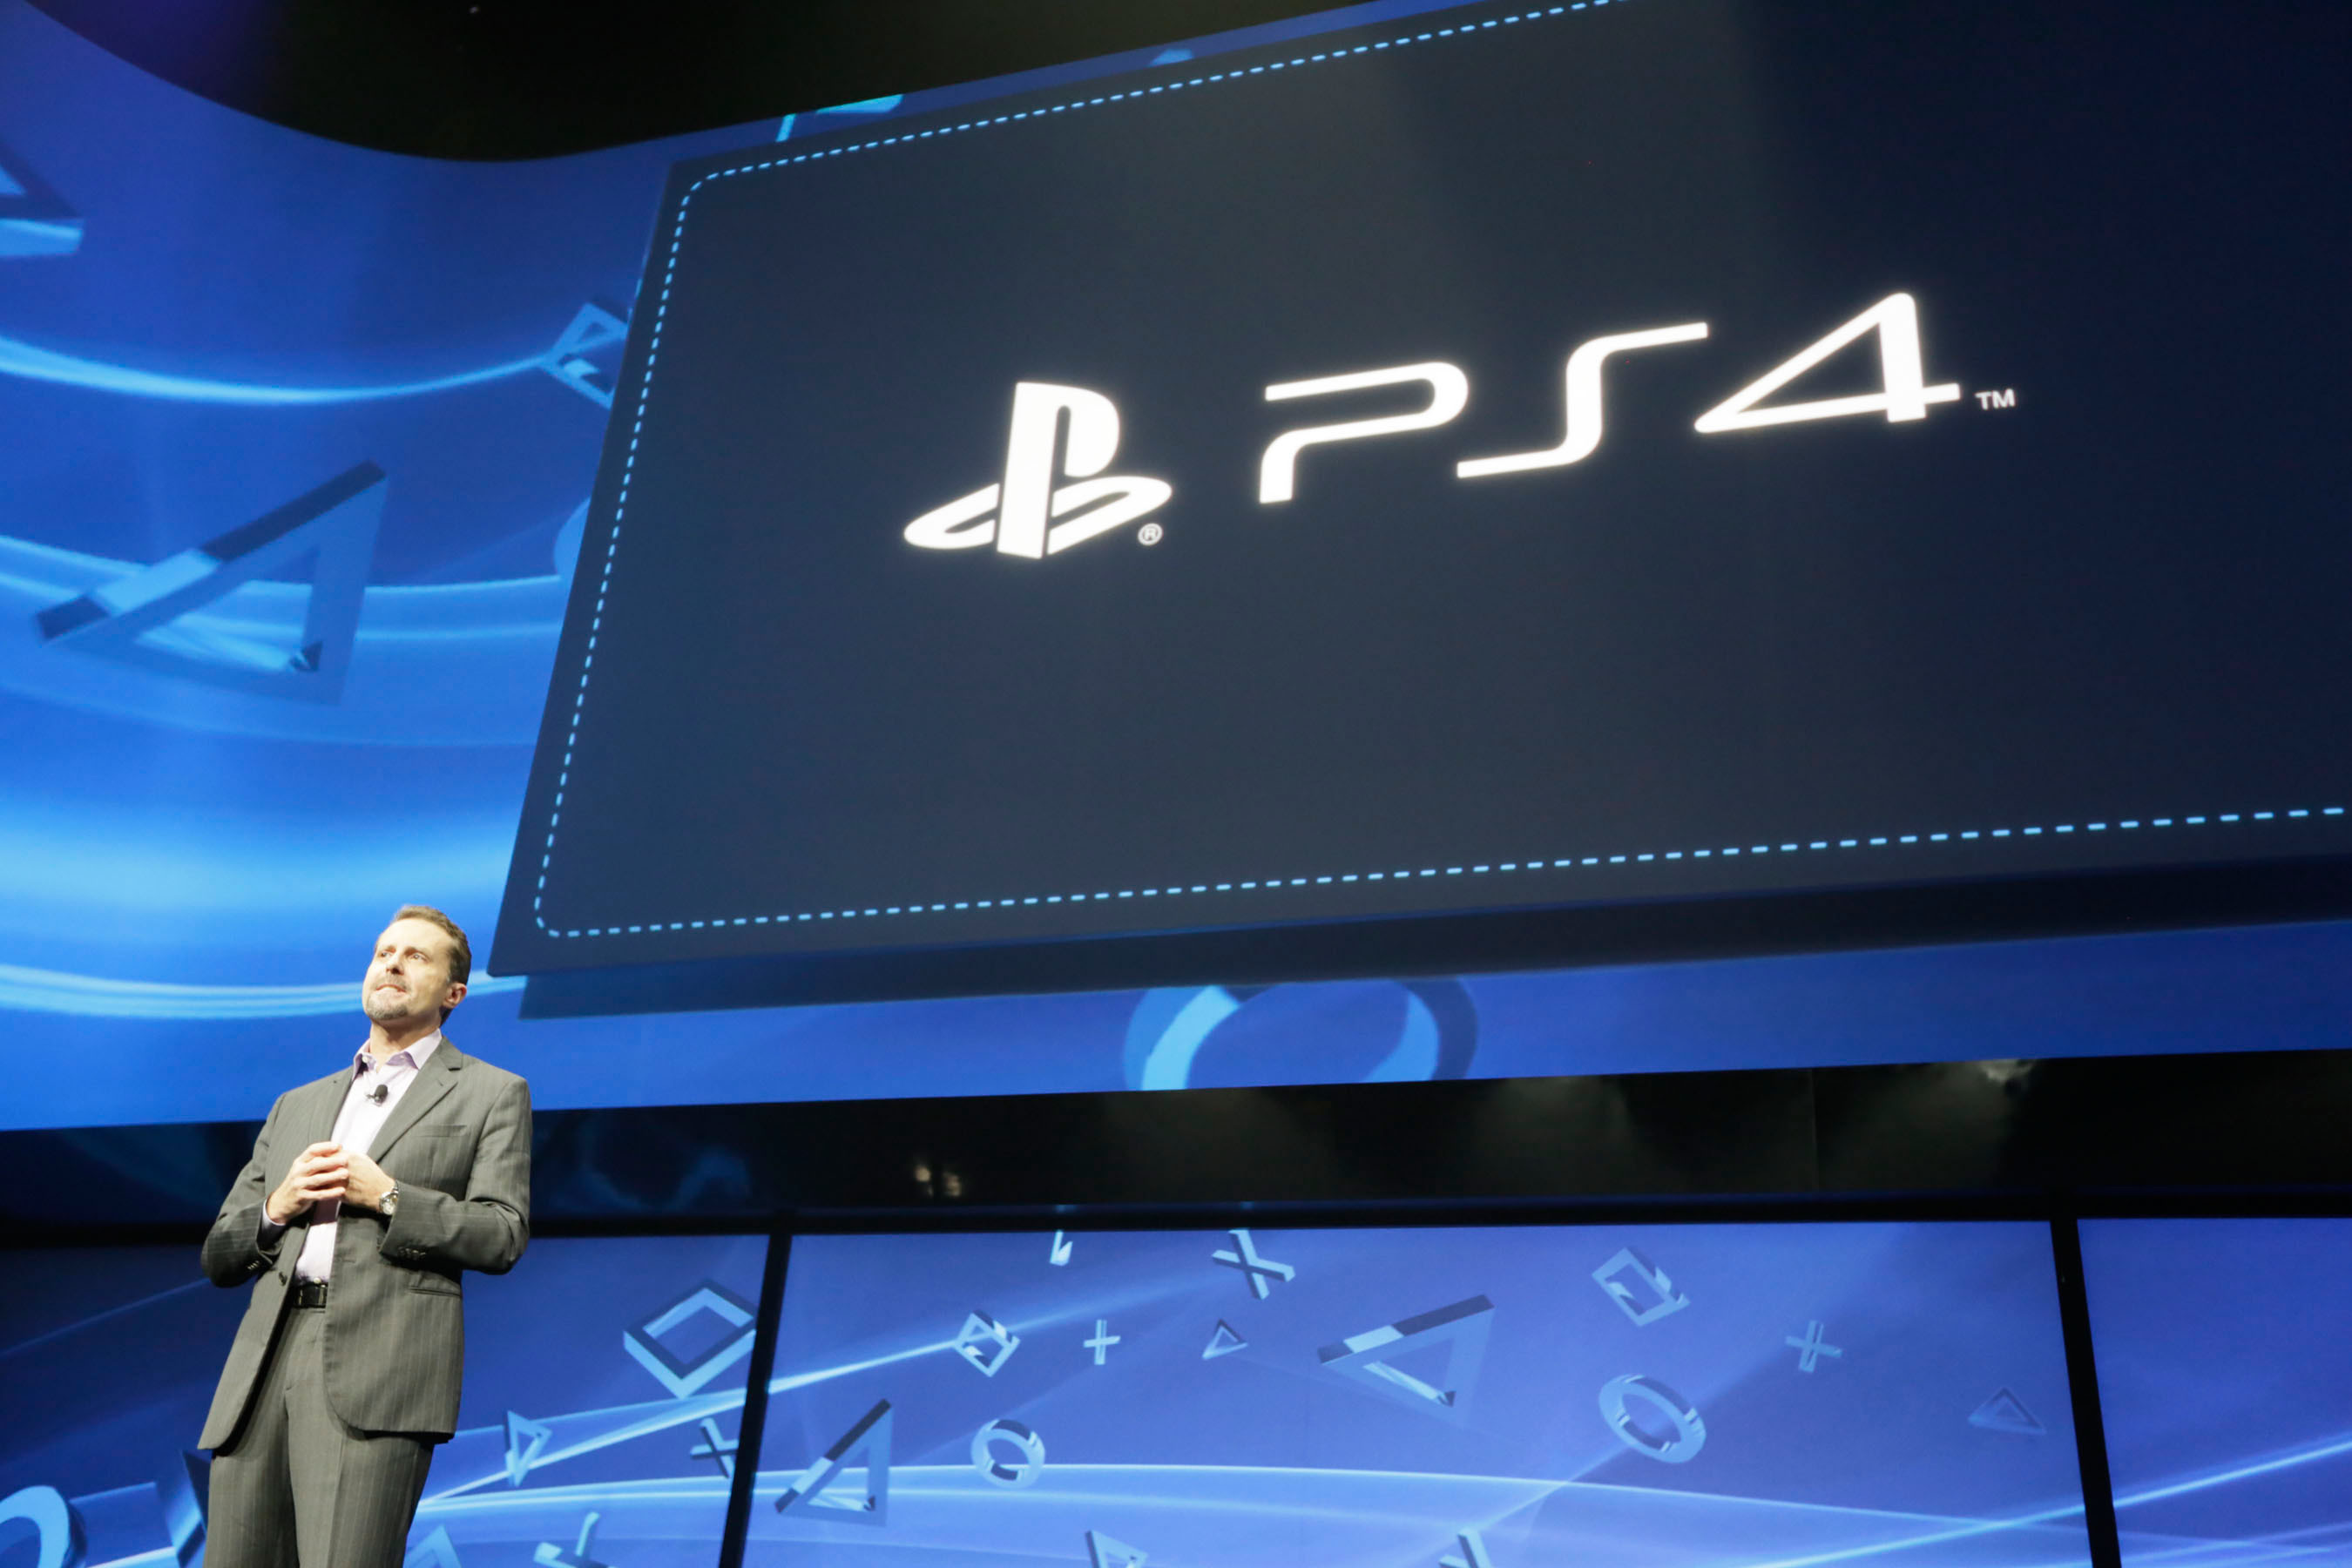 Andrew House, President and Group CEO, Sony Computer Entertainment, introduces PlayStation 4 for the first time. (PRNewsFoto/Sony Computer Entertainment Inc.) (PRNewsFoto/SONY COMPUTER ENTERTAINMENT INC.)